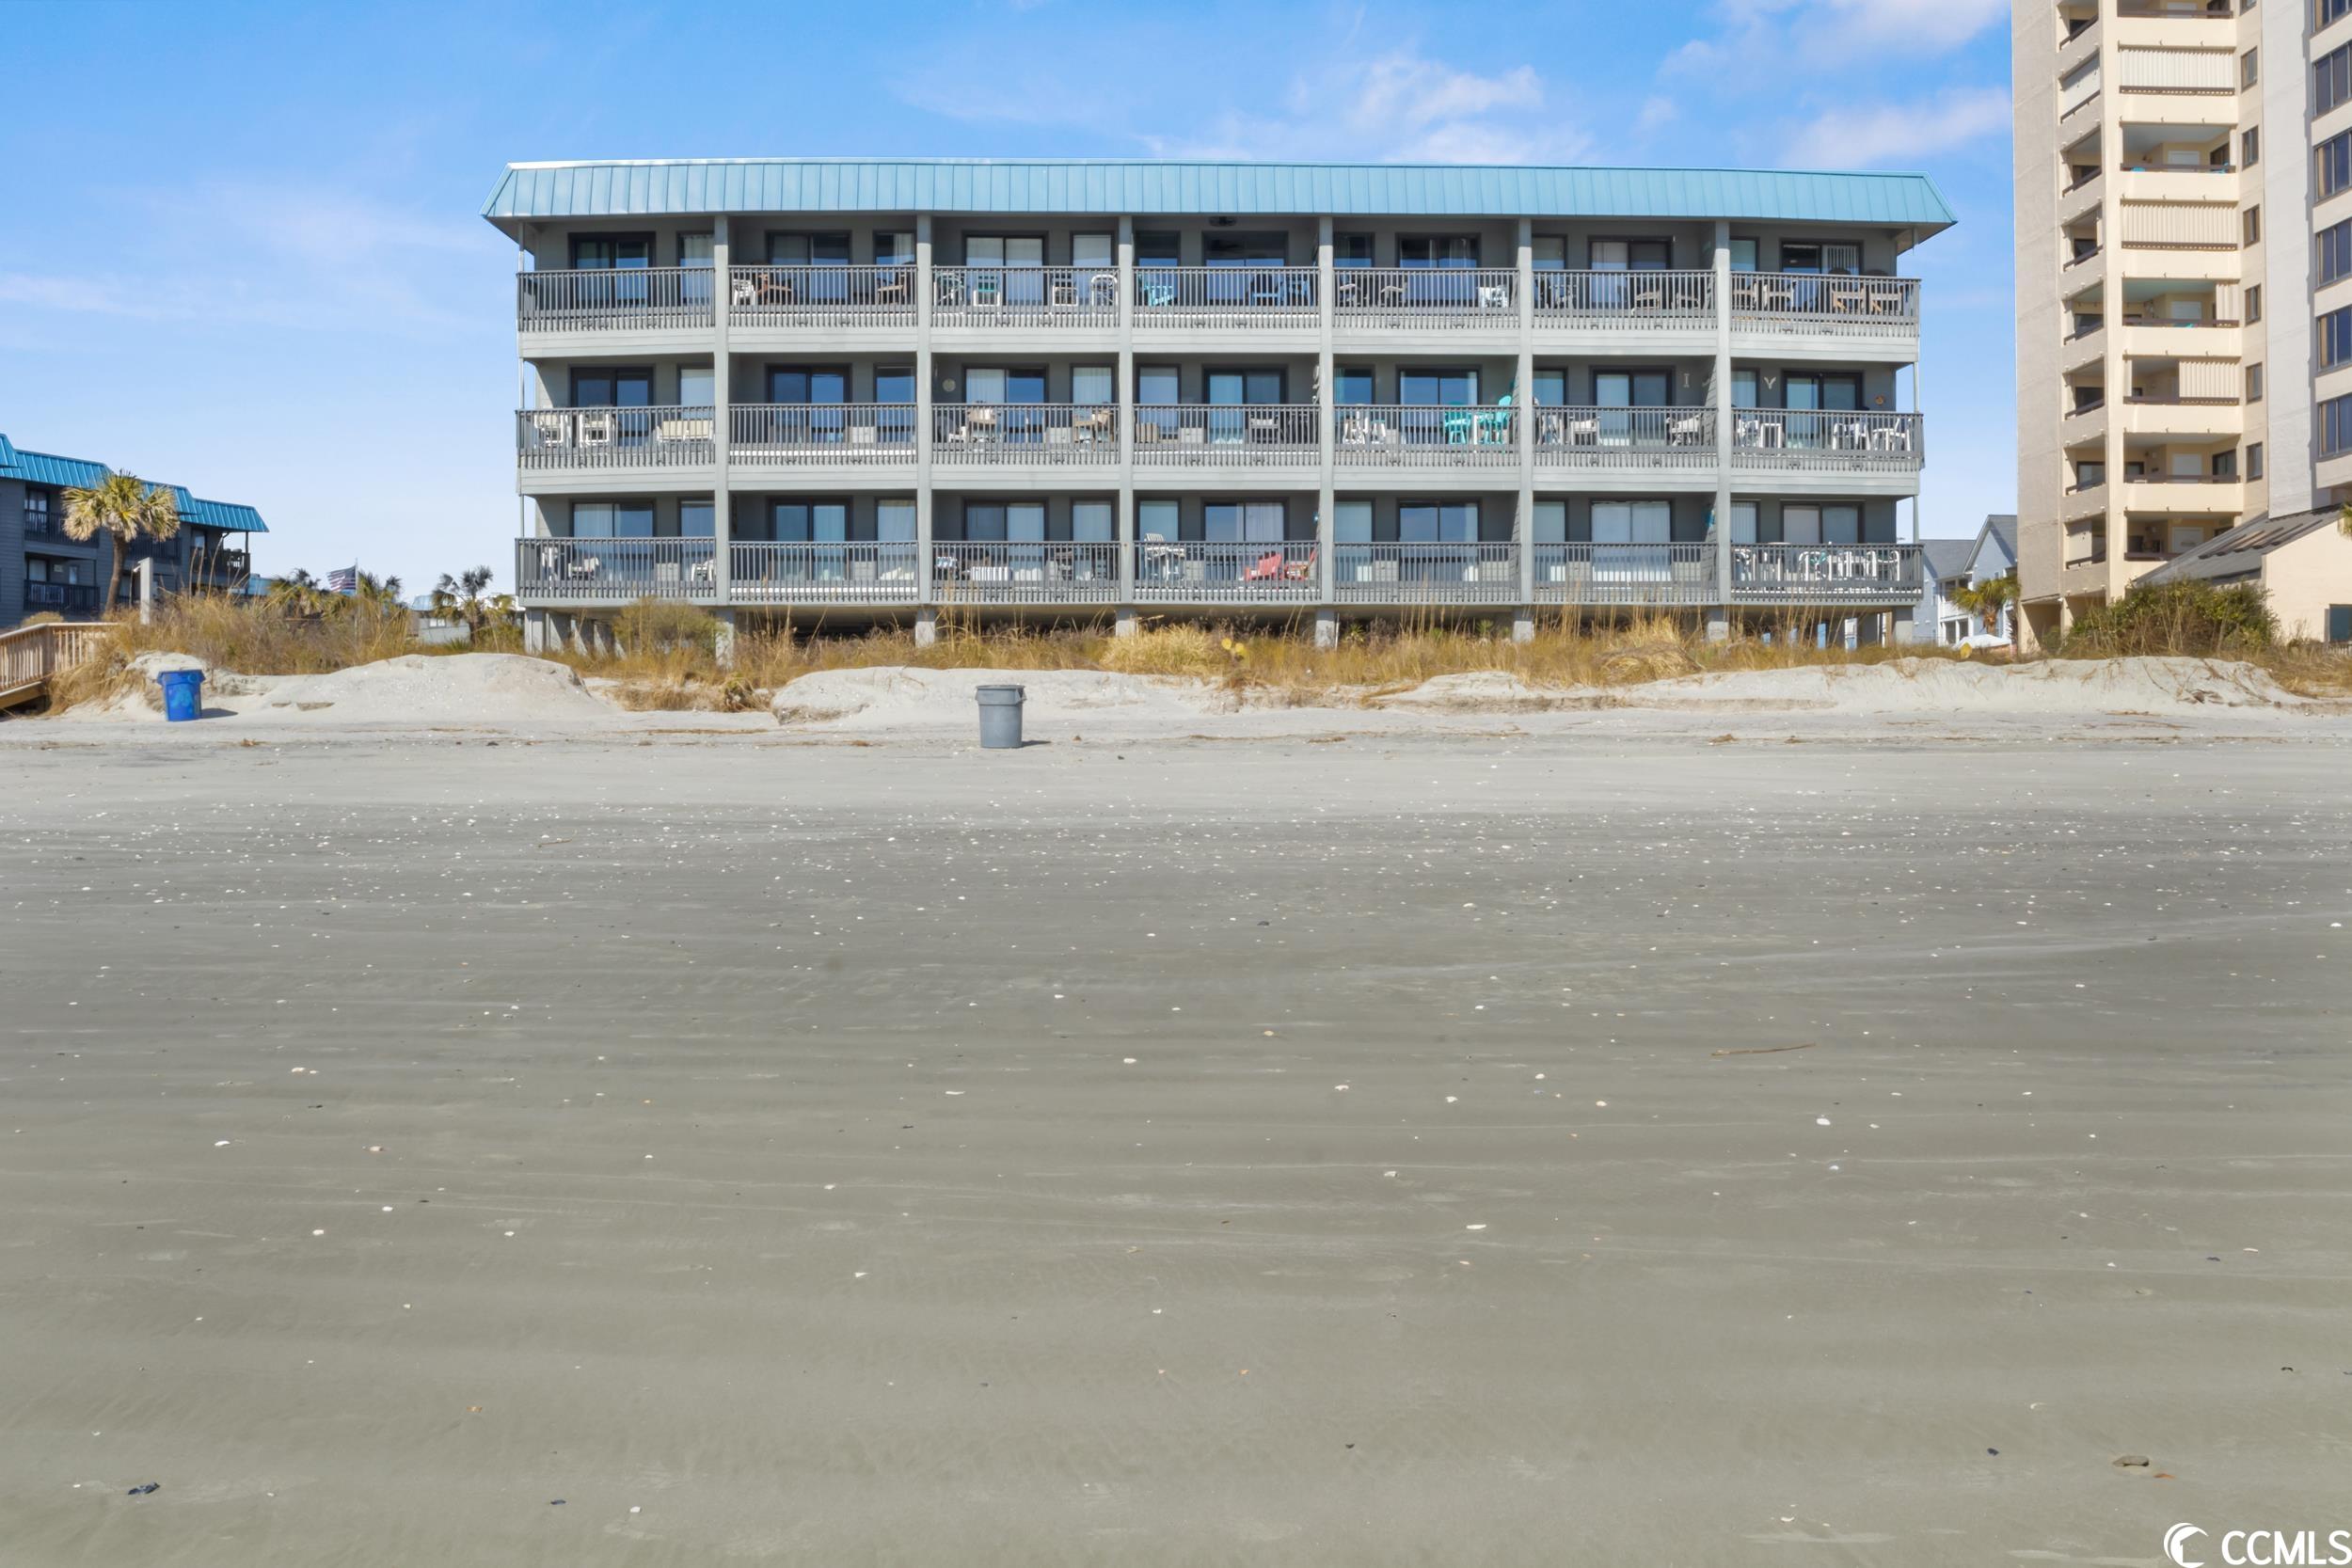 here's a nice little 2-bedroom sea cabin, nestled up in the cherry grove section of north myrtle beach. enjoy the coastal breeze and picturesque views from the balcony, while the small wet bar adds a touch of fun. sea cabin is a a quaint low-rise building that offers easy parking, a convenient location, and has a long list of amenities, including a swimming pool and a fishing pier. this unit works great for a relaxing beach retreat, a full-time residence, or investment property.  don't delay - book your showing today!